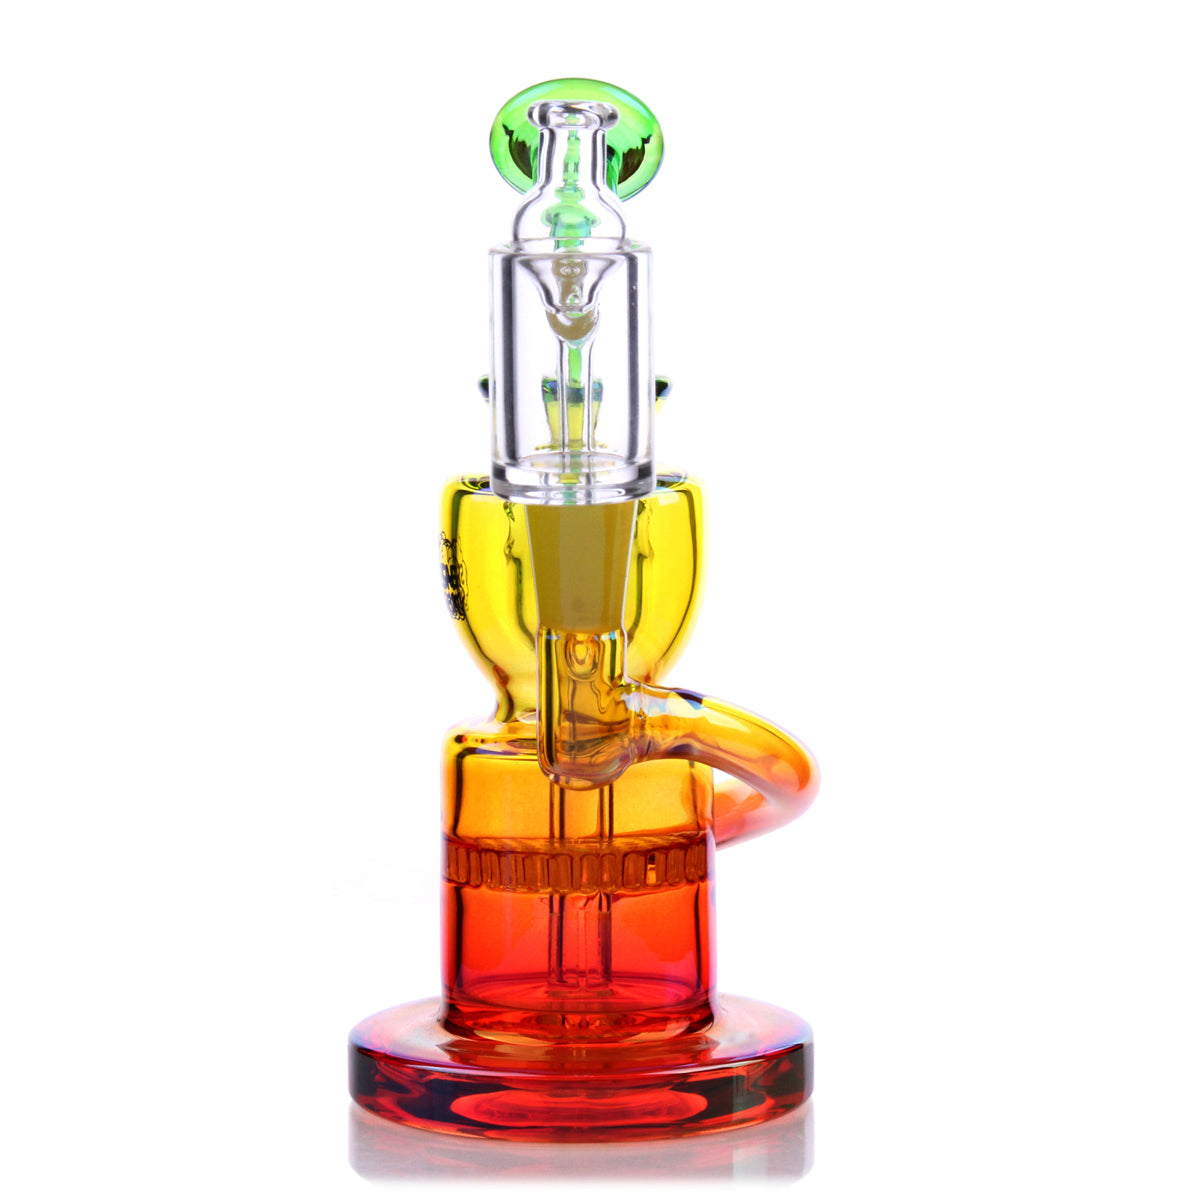 Dahlia Mini Rig in Rasta colors, 5.5" tall with honeycomb percolator, 90-degree joint, front view